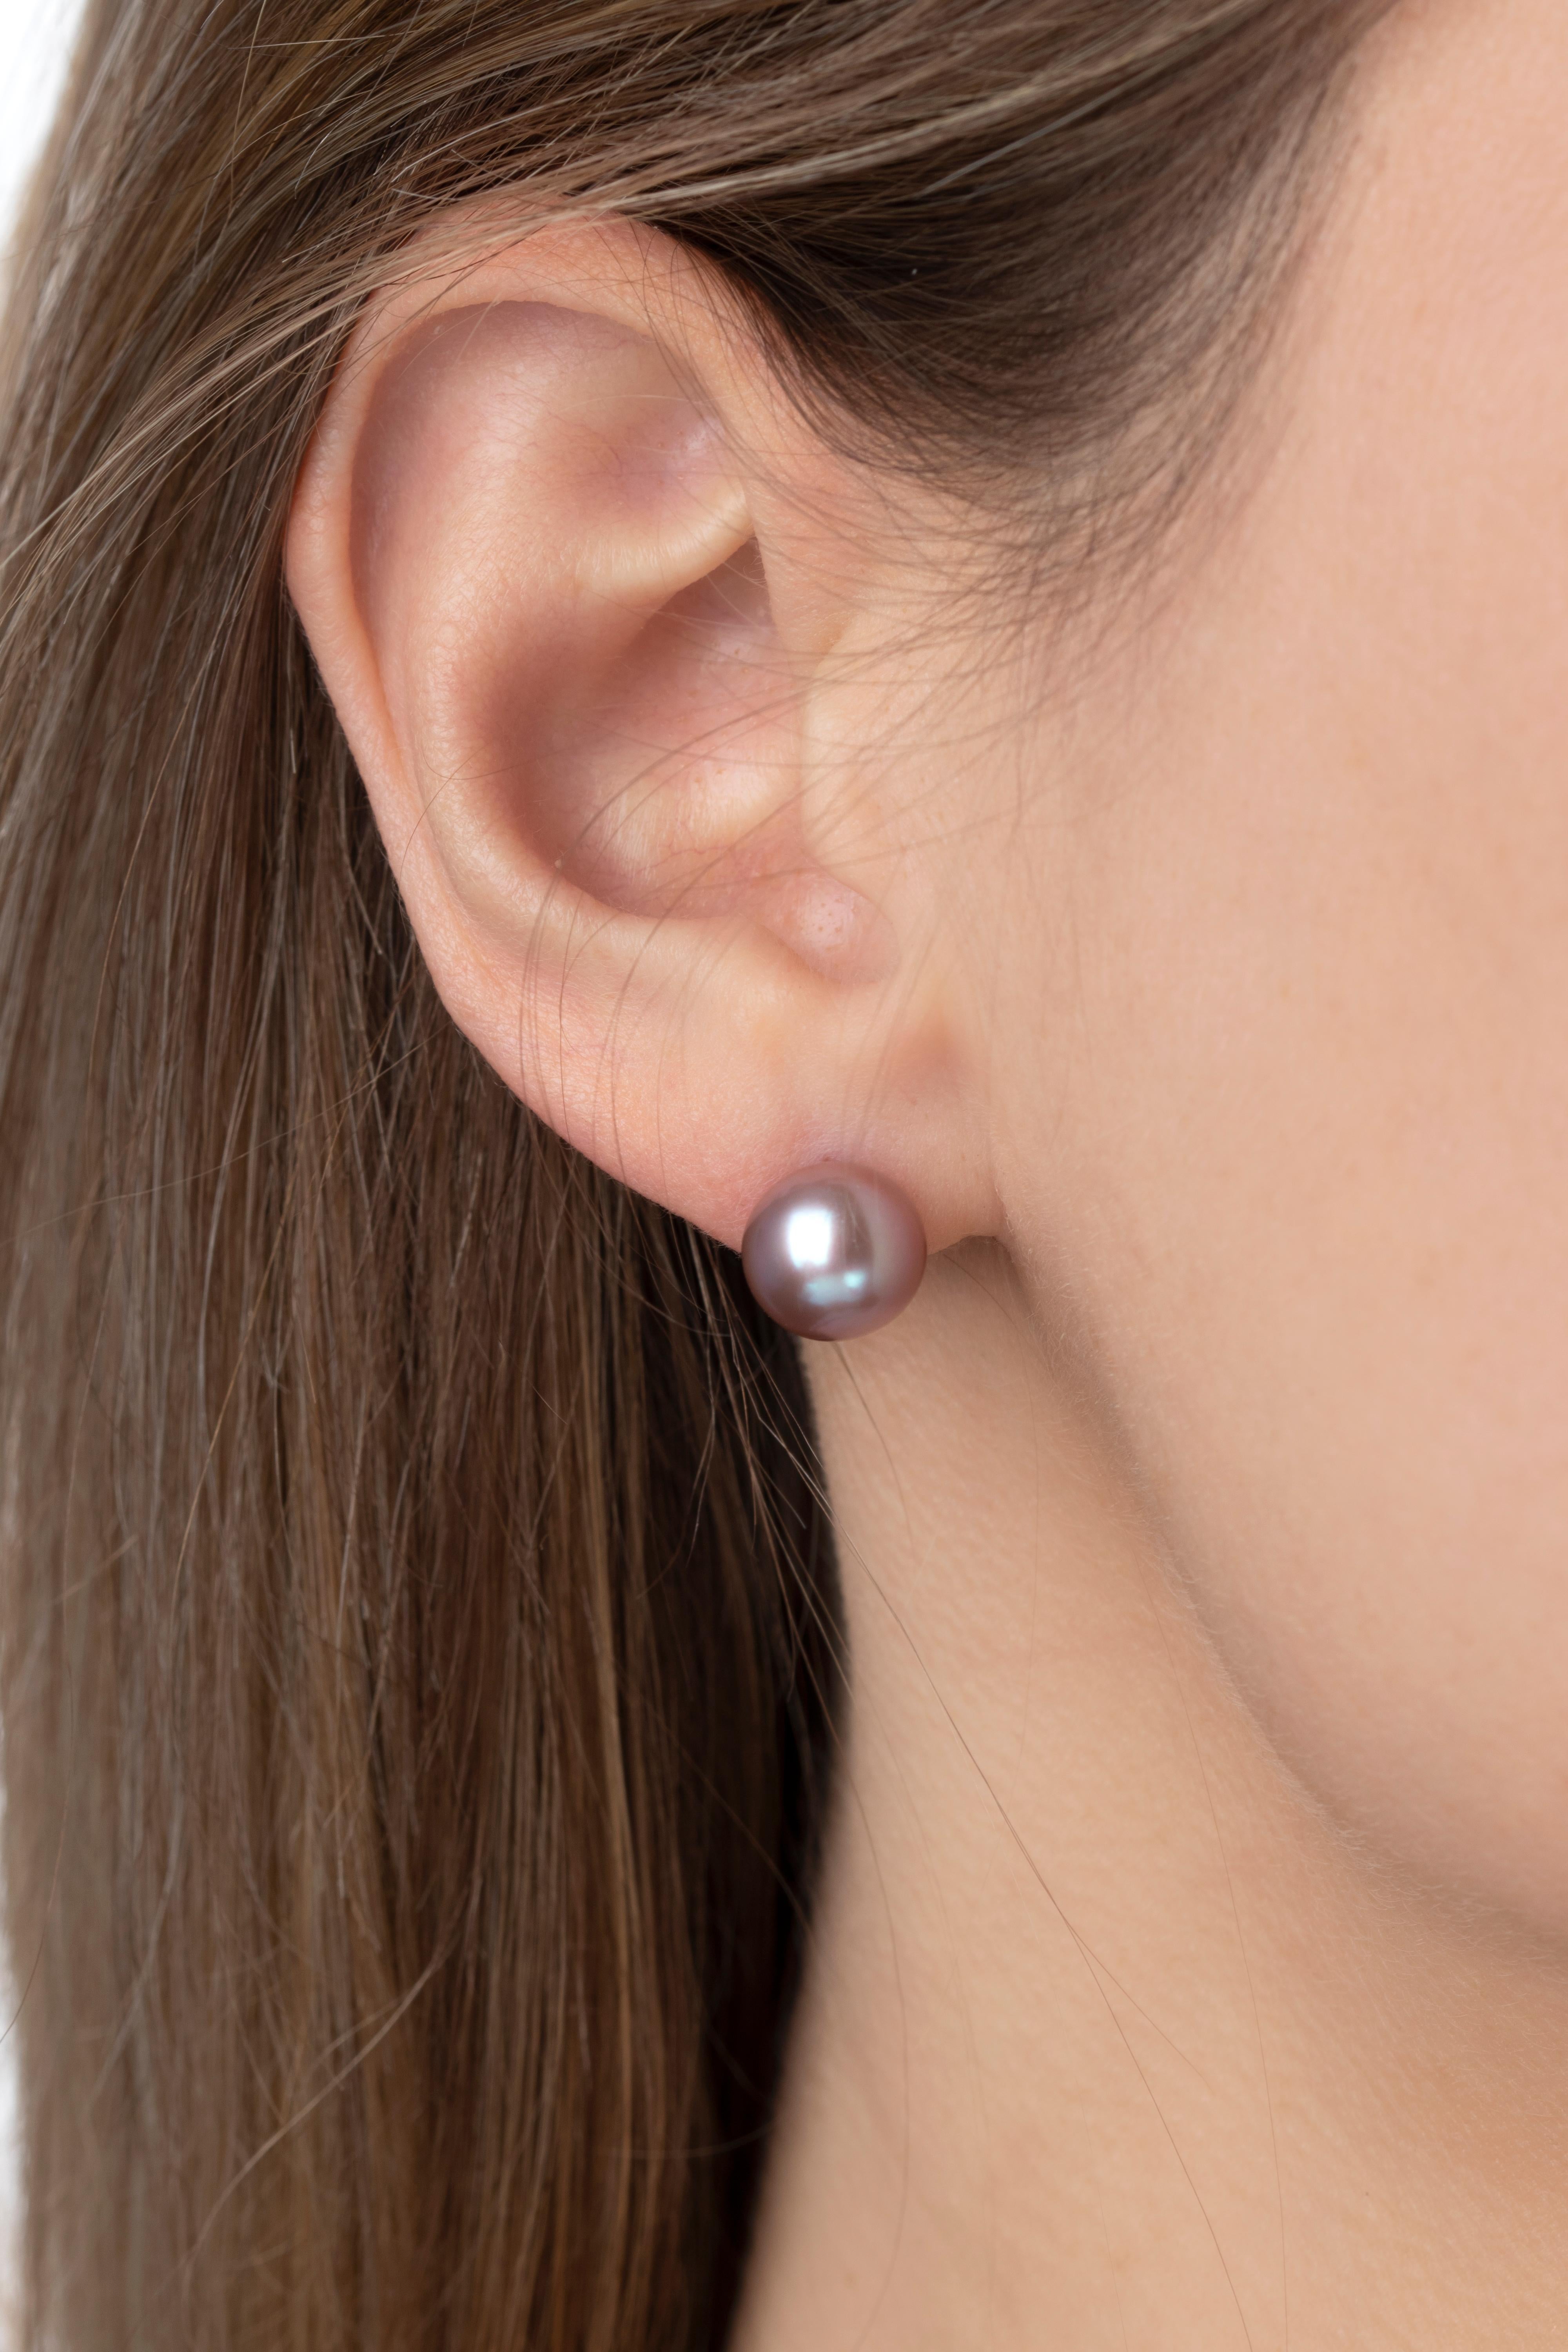 These classic studs by Yoko London feature two perfectly matched natural coloured freshwater pearls which have been selected by experts for their superior surface quality and lustre. Elegant in any context, these timeless studs will add a playful